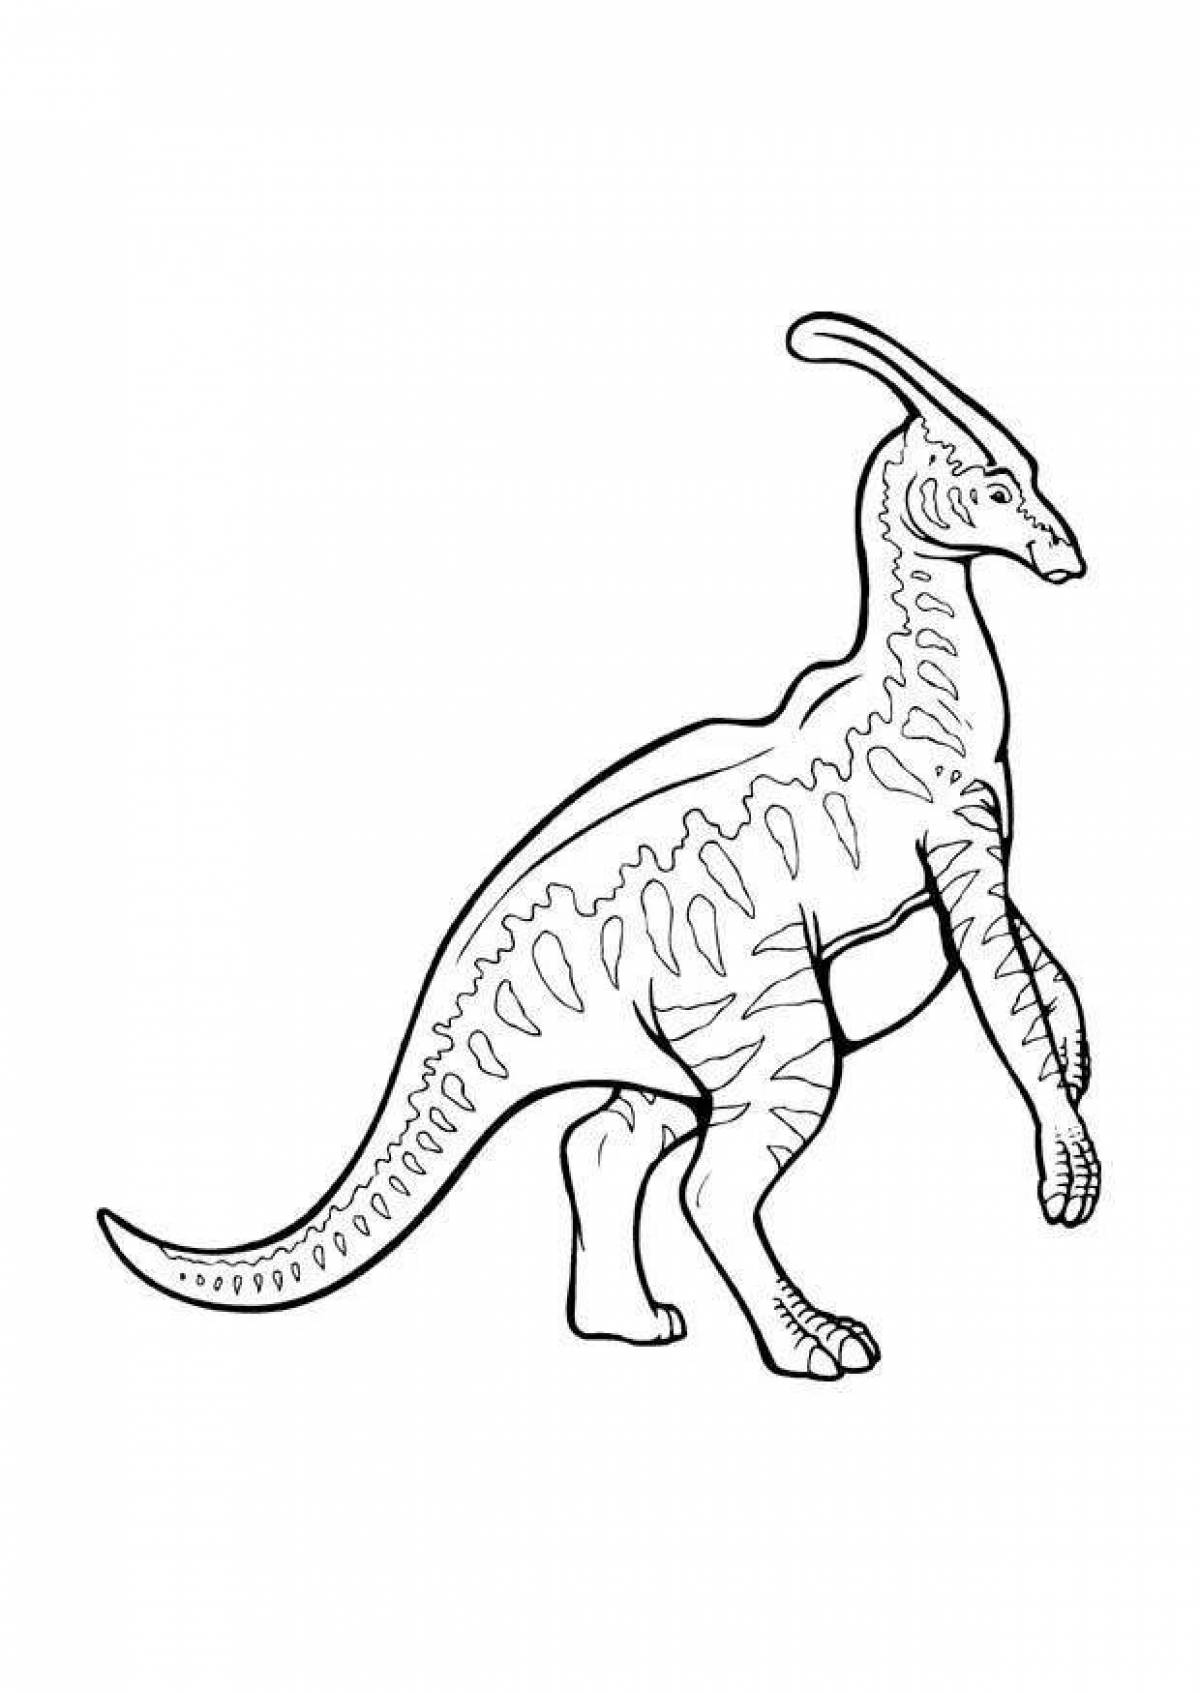 Coloring page funny parasaurolophus